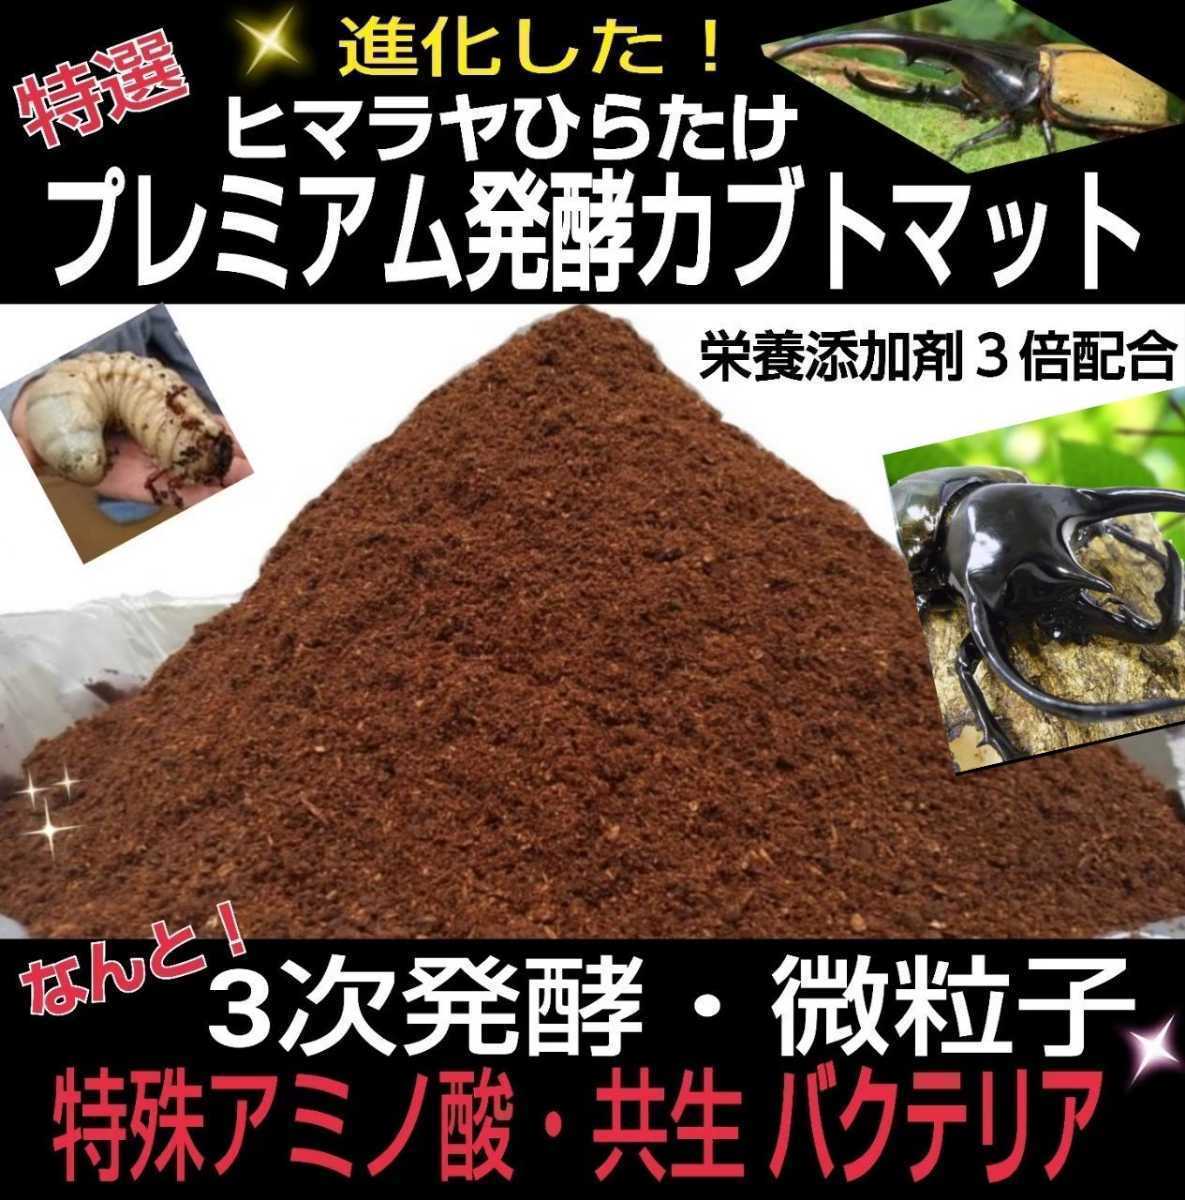  foreign product rhinoceros beetle . on a grand scale want to do person .! premium 3 next departure . mat [2 sack ] special amino acid 3 times combination *tore Hello s, chitosan, royal jelly strengthen 